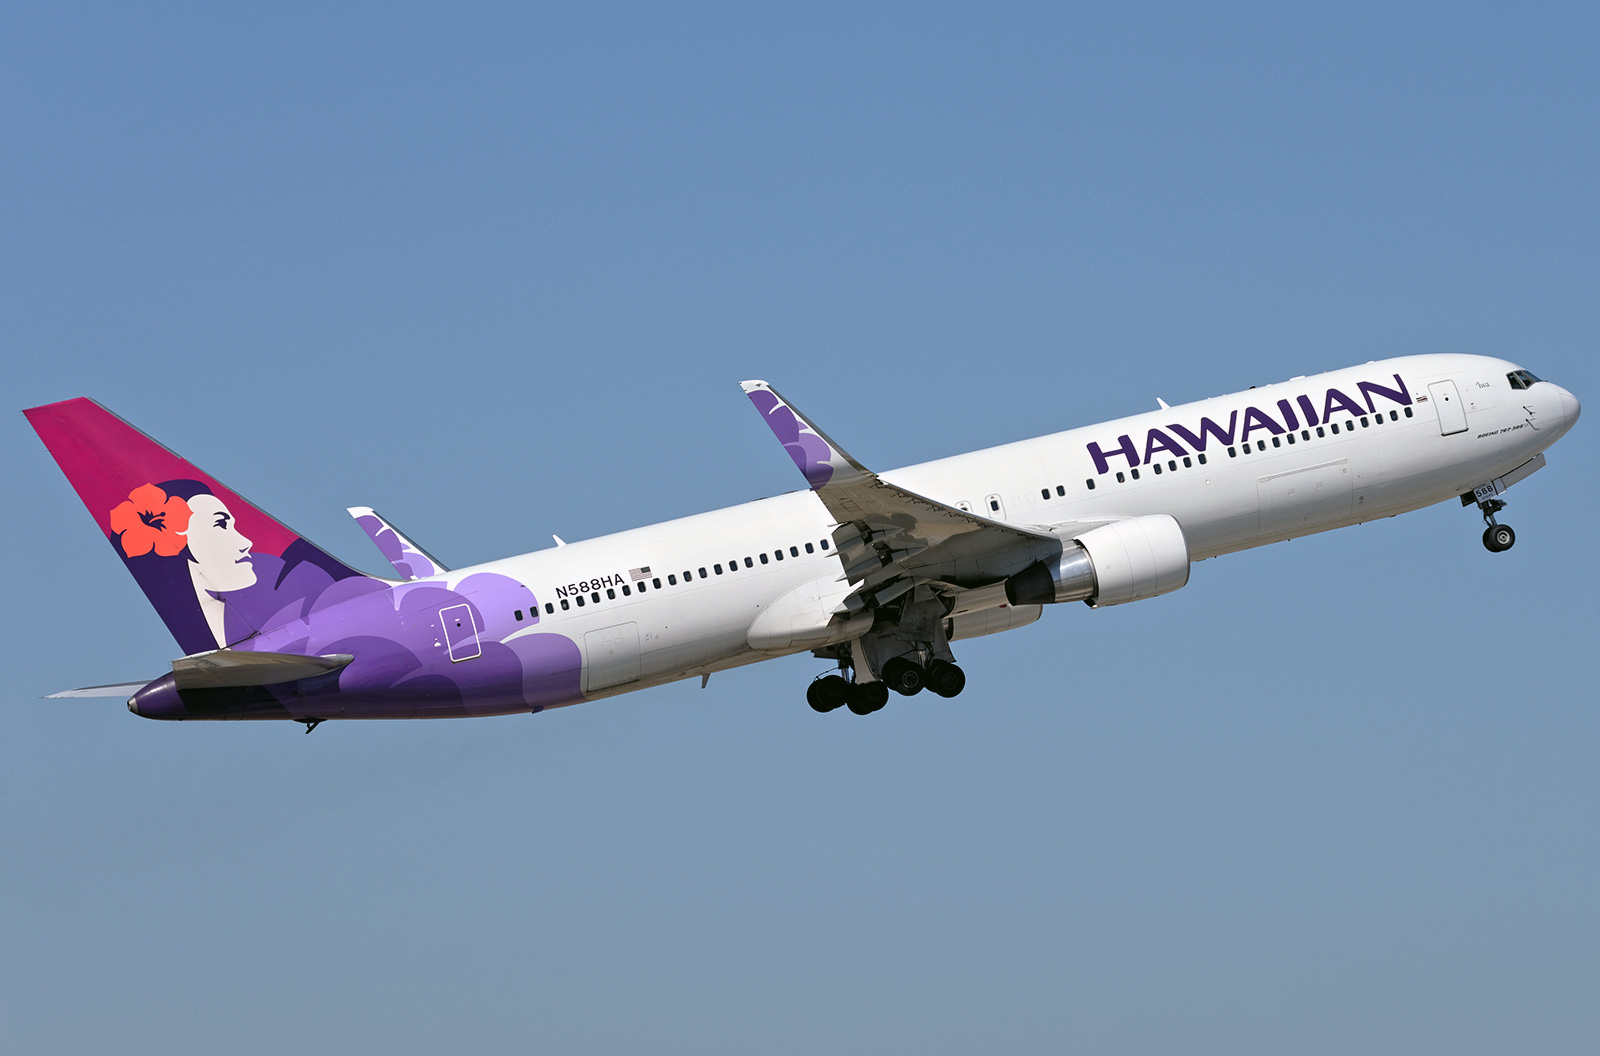 Boeing 767 300 Hawaiian Airlines Seating Chart